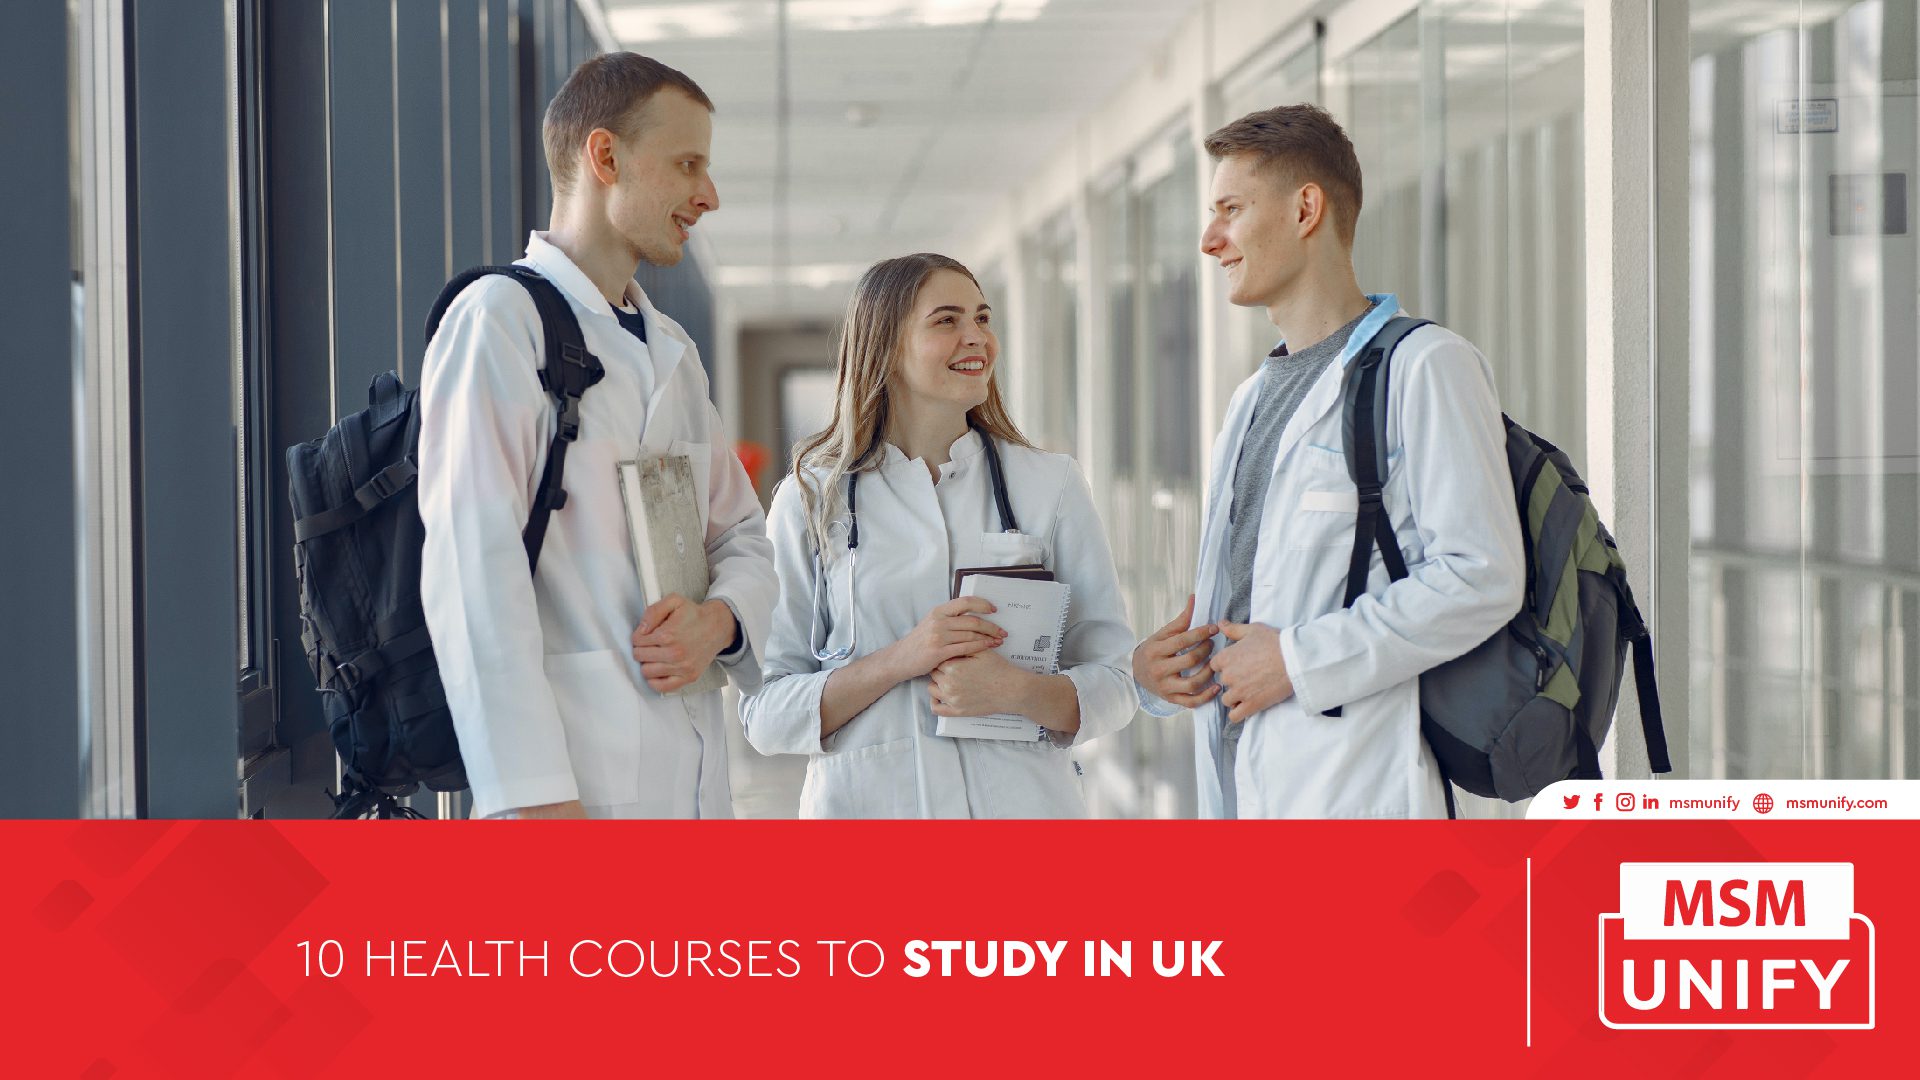 111422 MSM Unify 10 Health Courses to study in UK 01